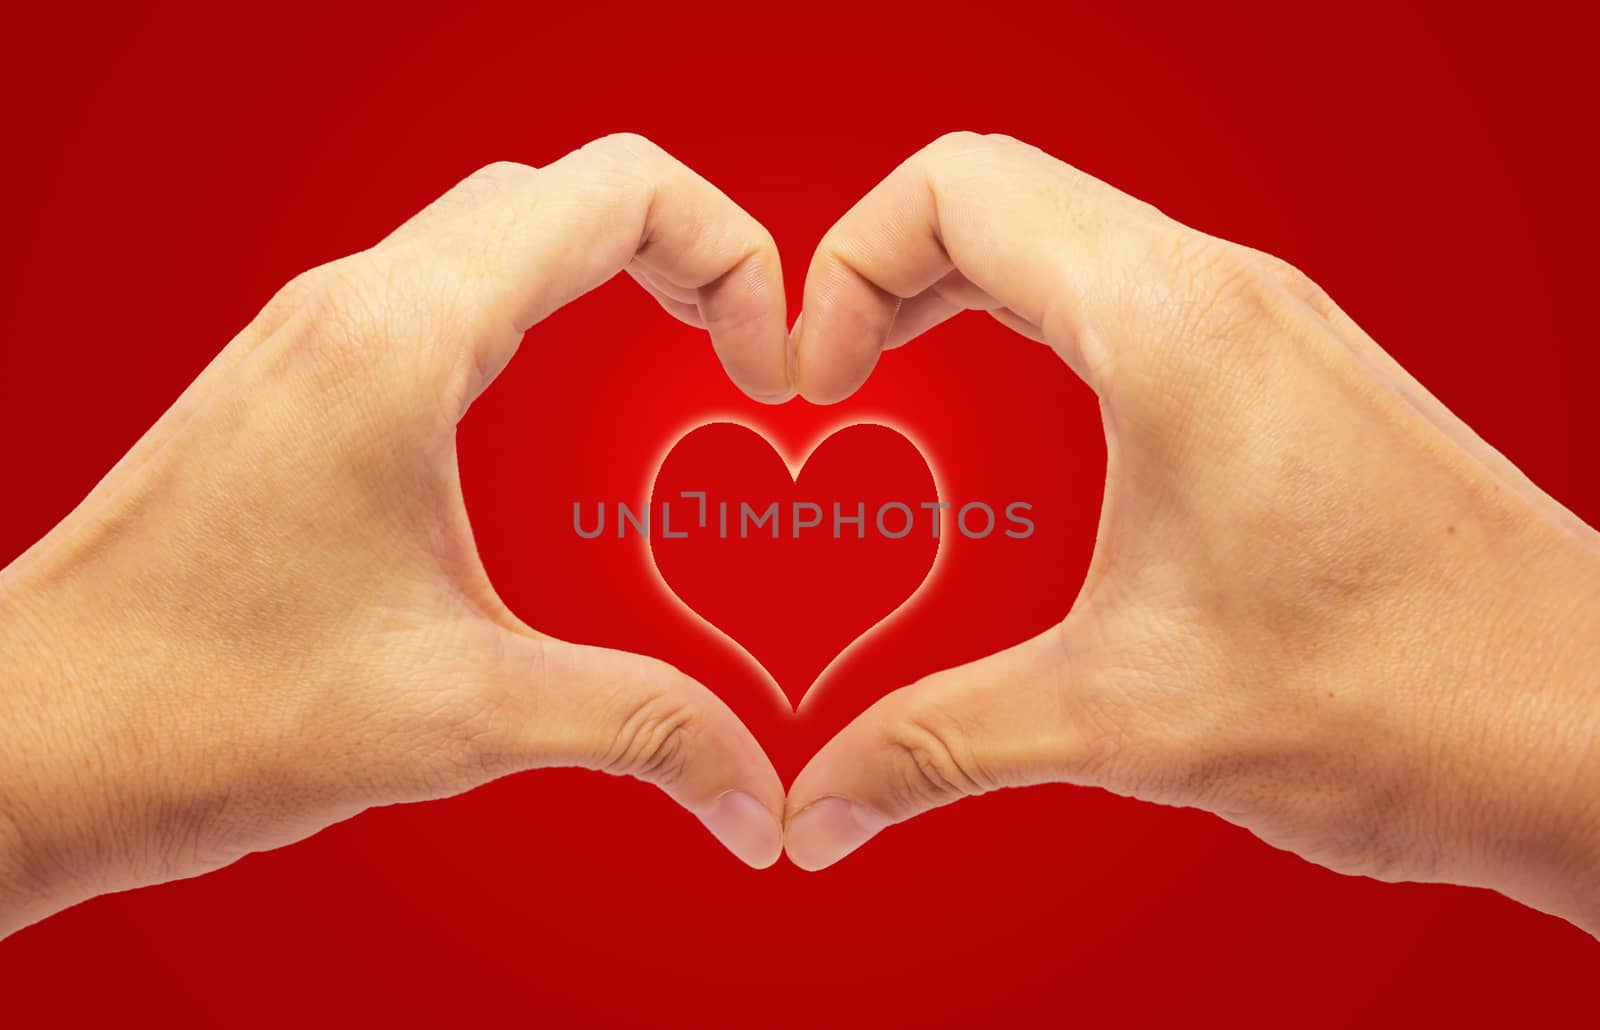 Valentines Day - Making Heart with 2 Hands on Red Background  by ttt1341